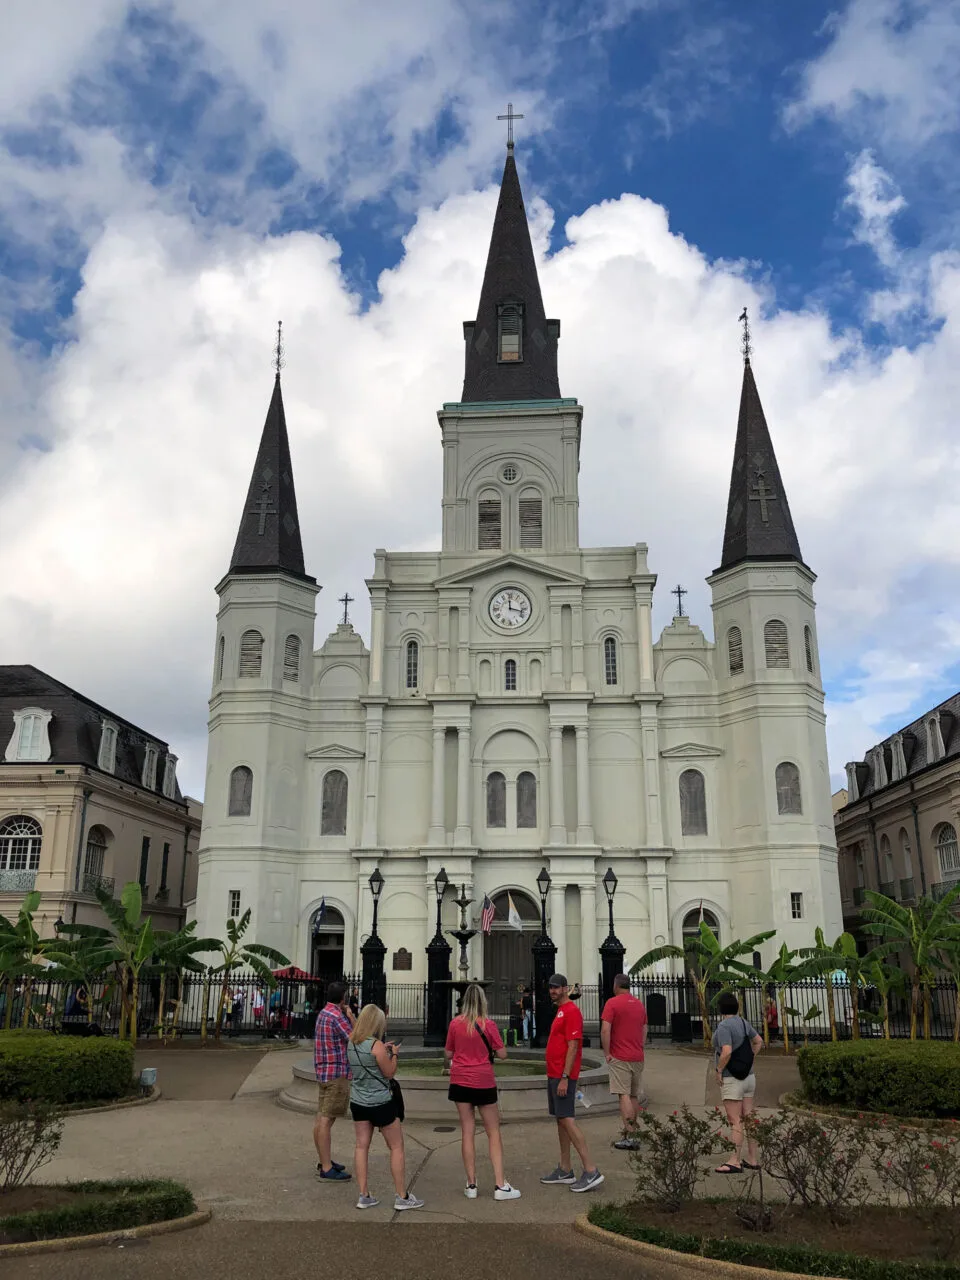 St. Louis Cathedral of New Orleans.